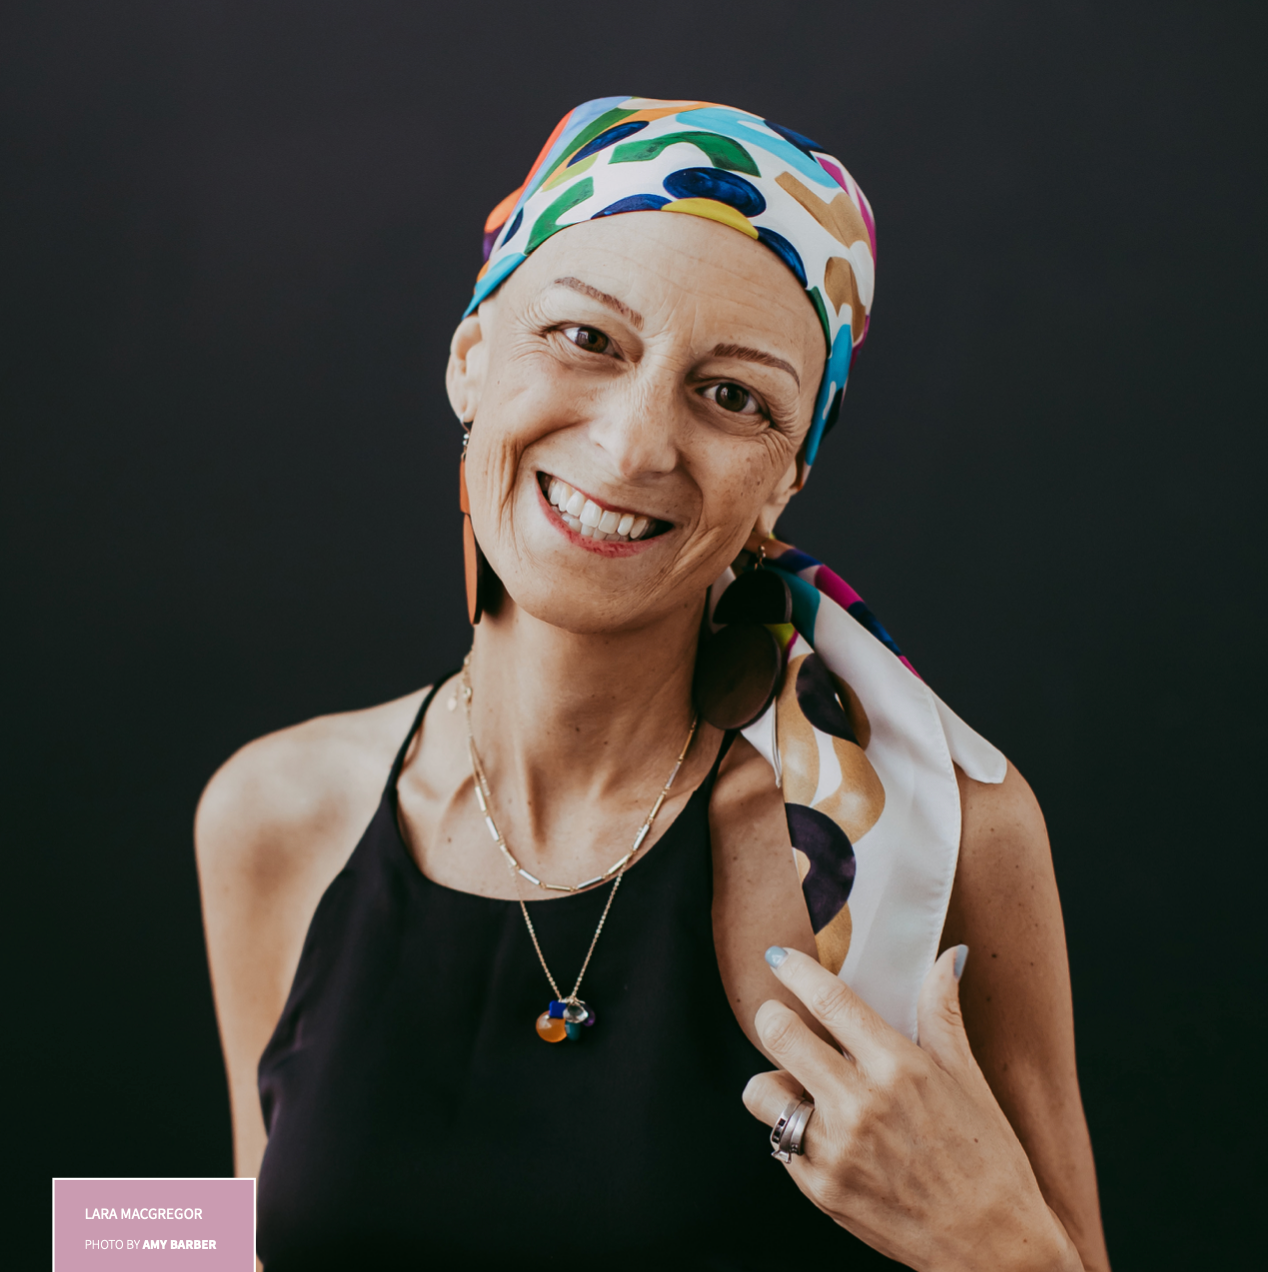 ‘I Feel as Though I Know Her:’ How Connectedness and Support for Patients With Metastatic Breast Cancer Travels Across Social Media